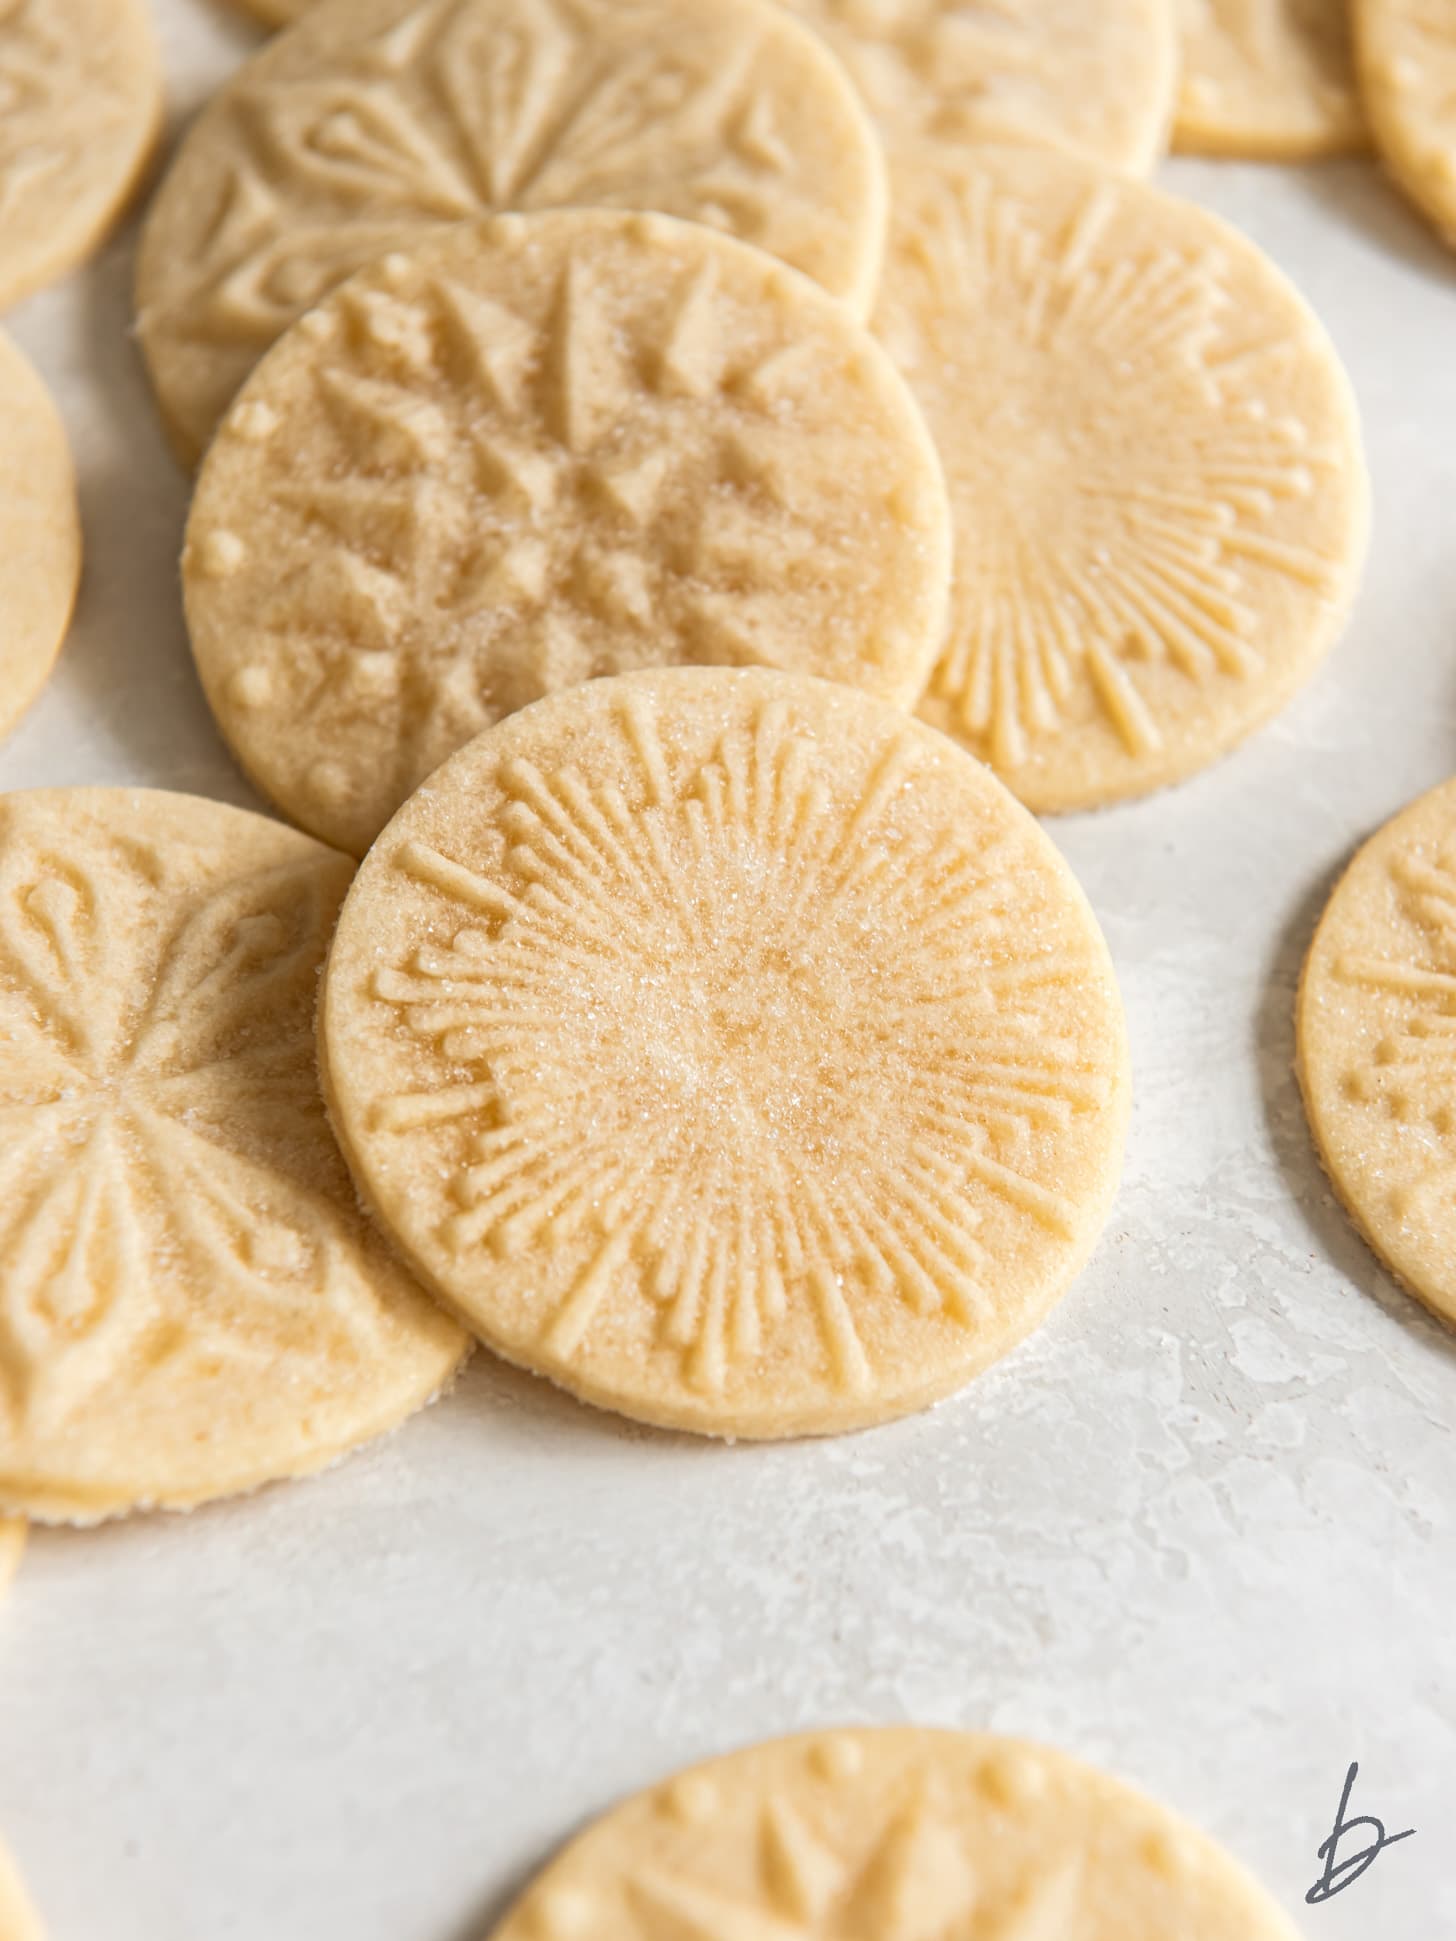 stamped shortbread cookie with starry design imprinted on it and leaning on more stamp cookies.